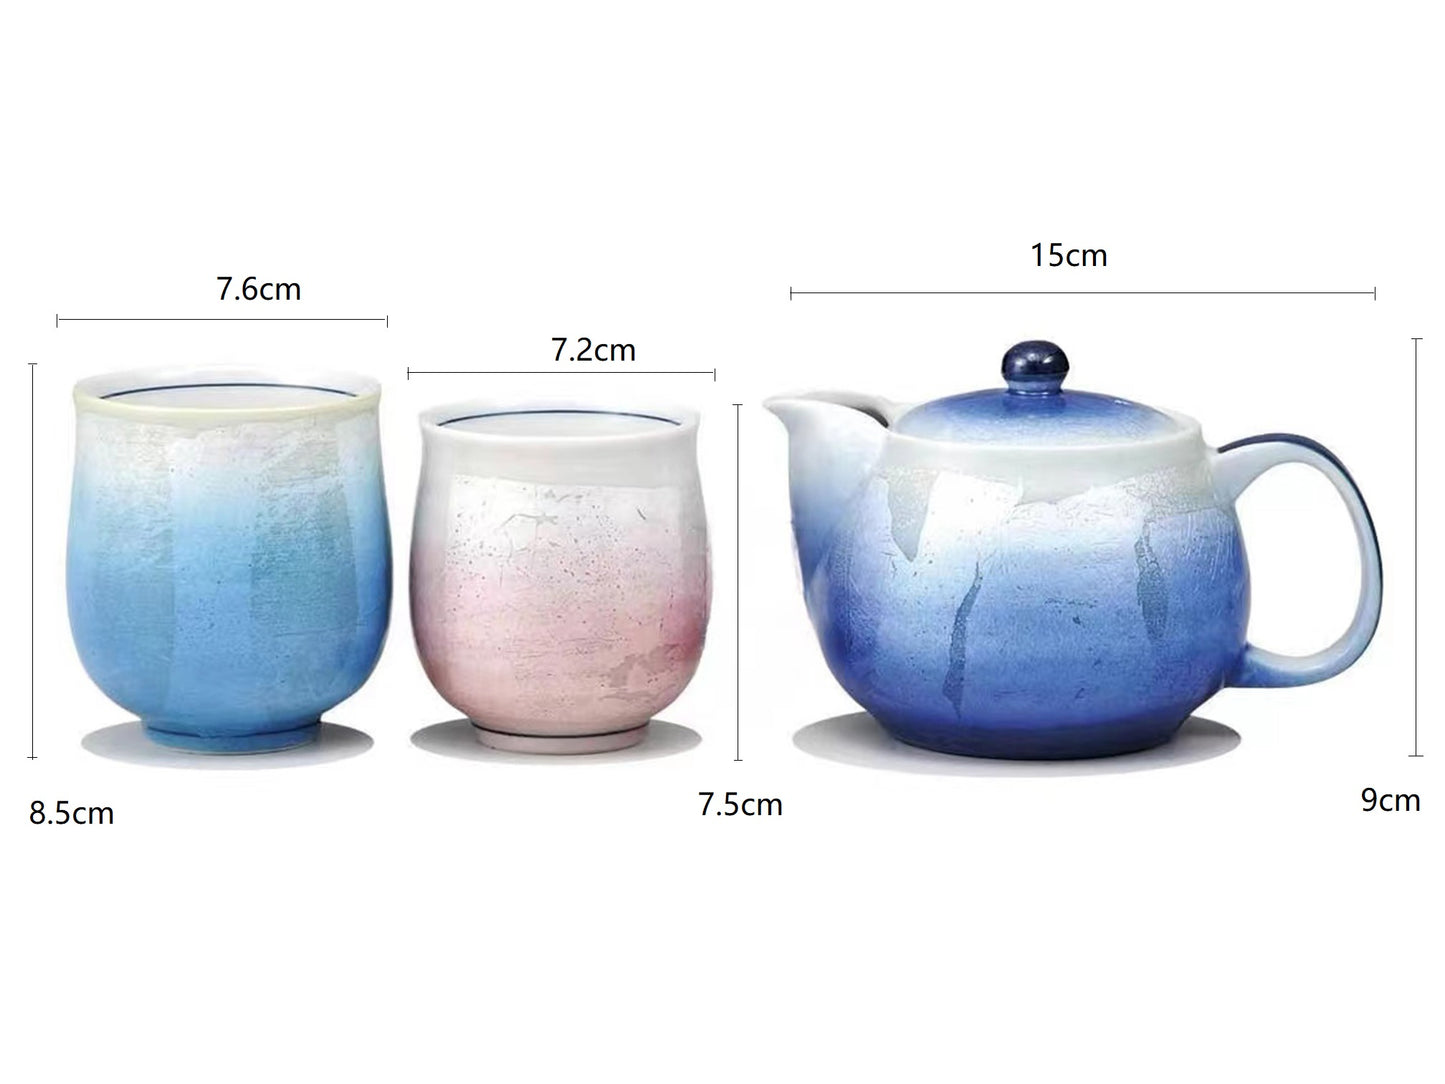 2023393set Kutani-Ware Silver Color One Pot 360ml 2 Cups 7.6*8.5cm+7.2*7.5cm With Gift Box